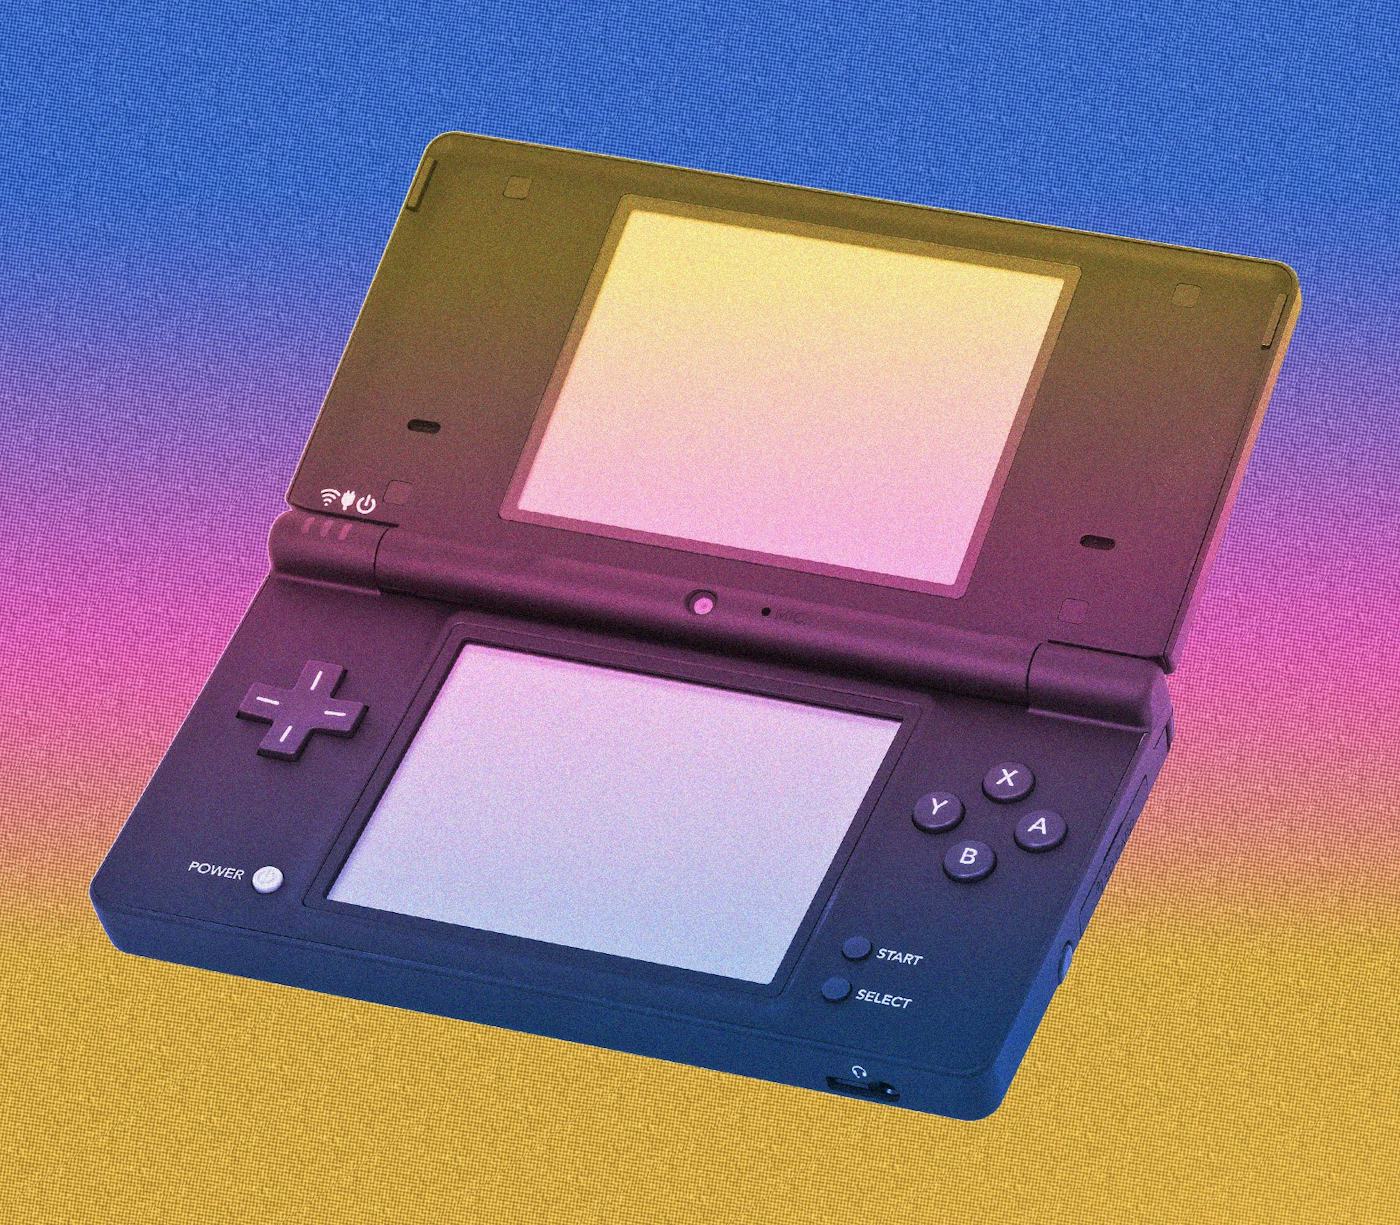 A Nintendo DS Lite handheld gaming console displayed open, against a gradient purple and yellow background.